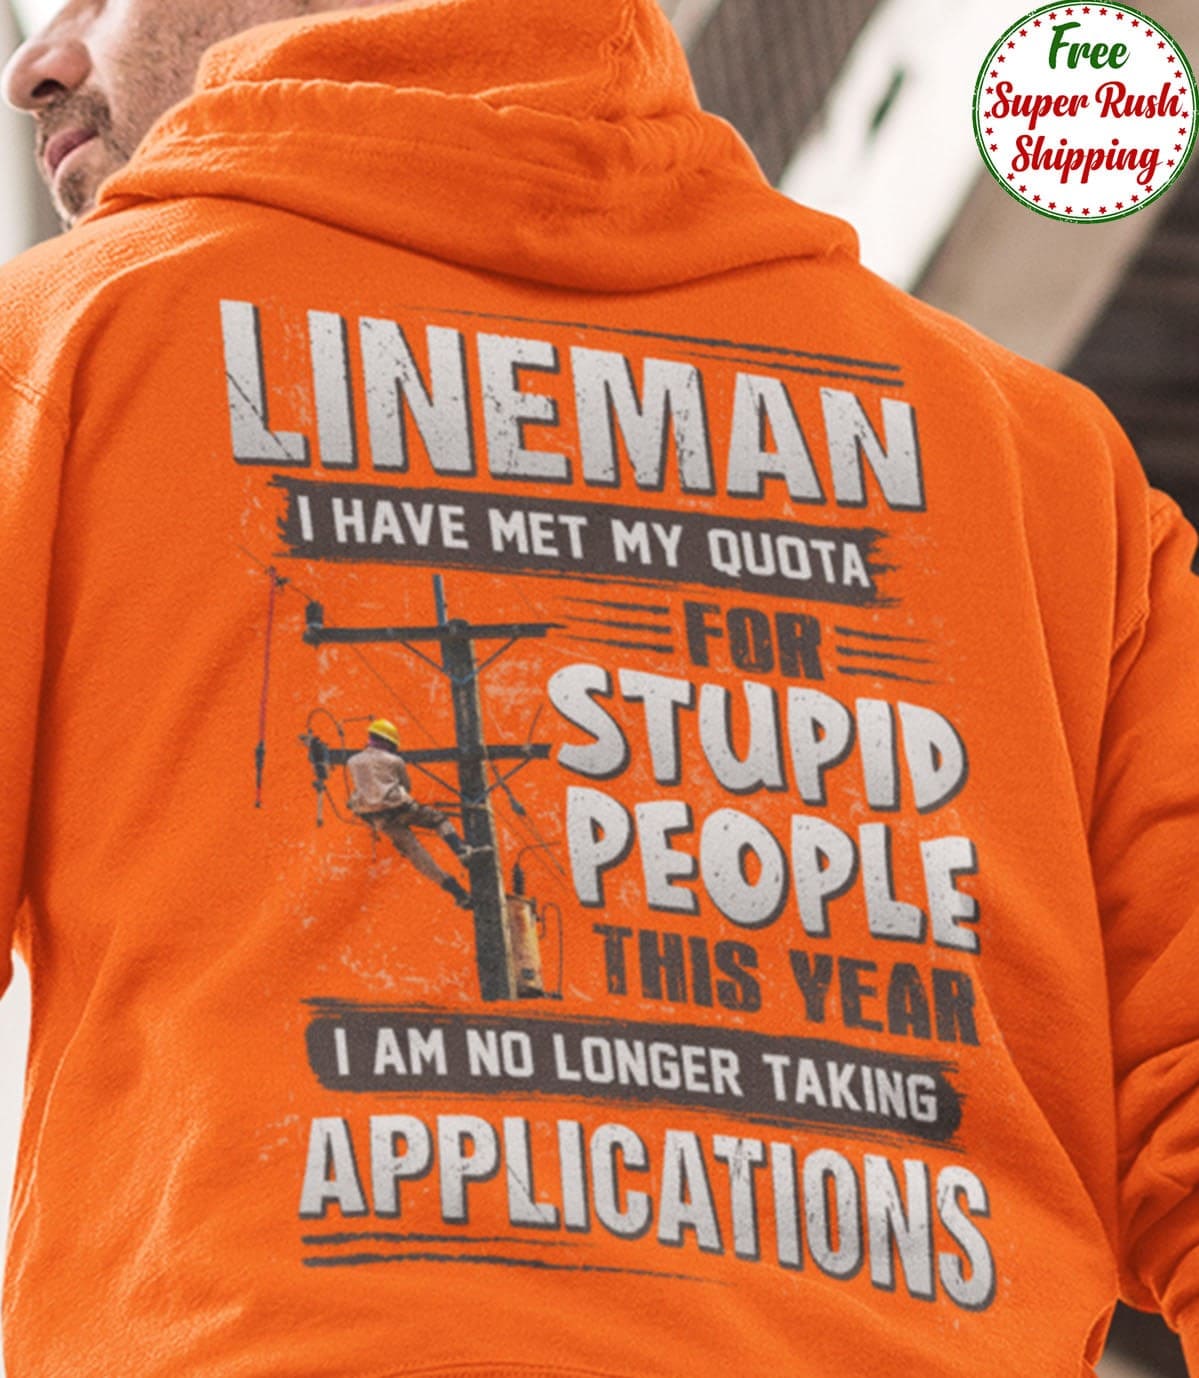 Lineman The Job - Lineman i ahve met my quota for stupid people this year i am no longer taking applications